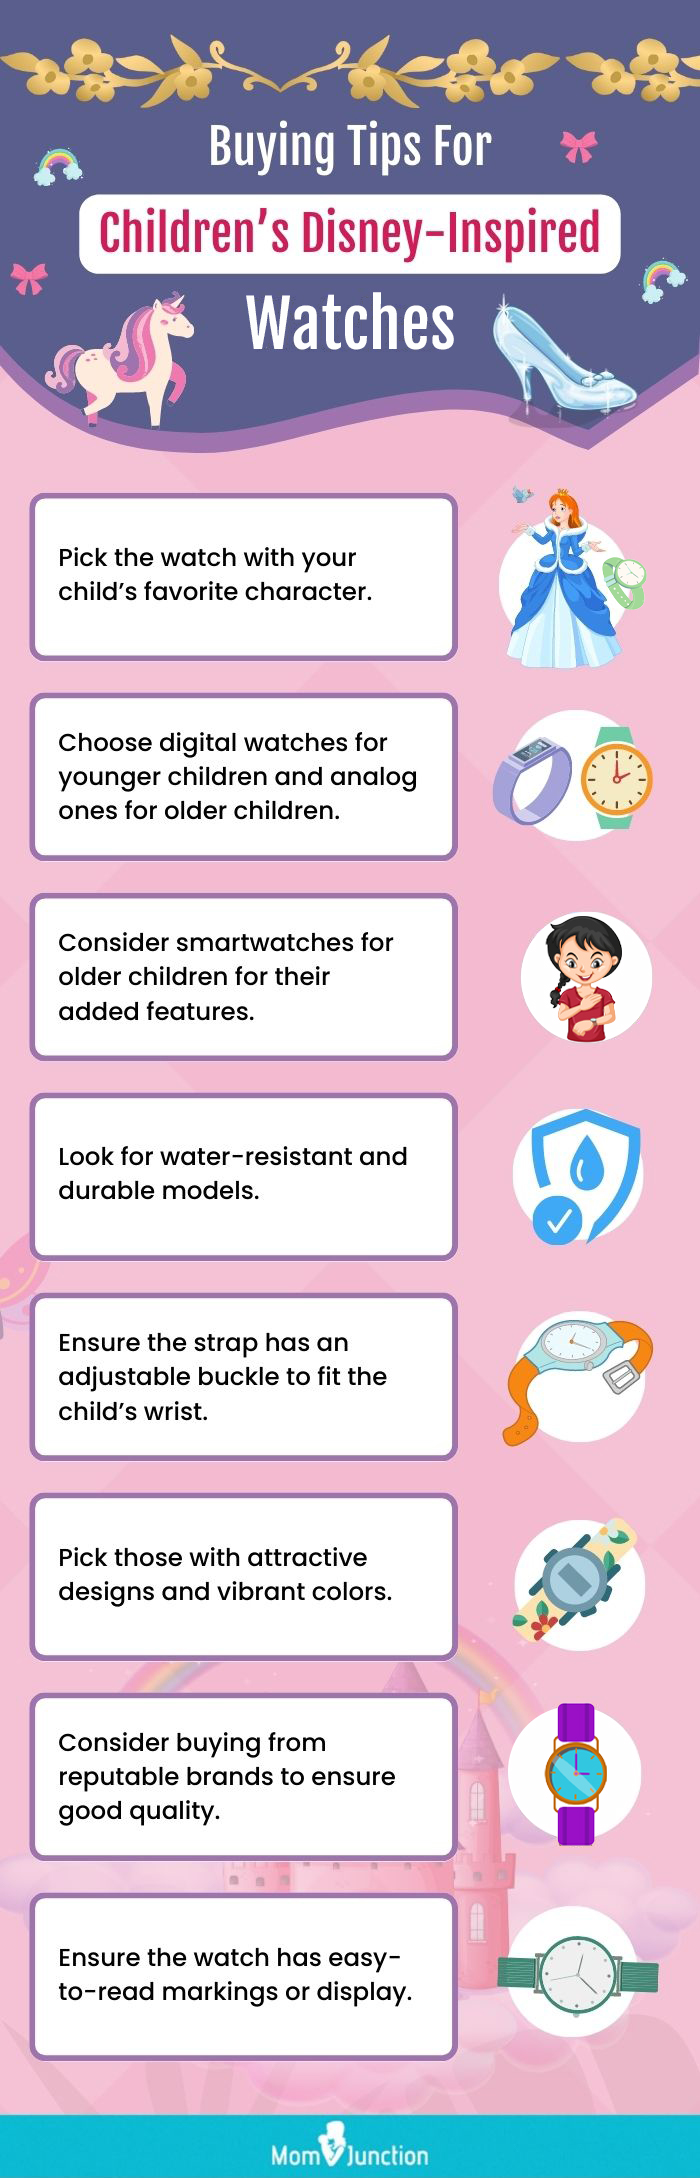 Buying Tips For Children’s Disney Inspired Watches (infographic)